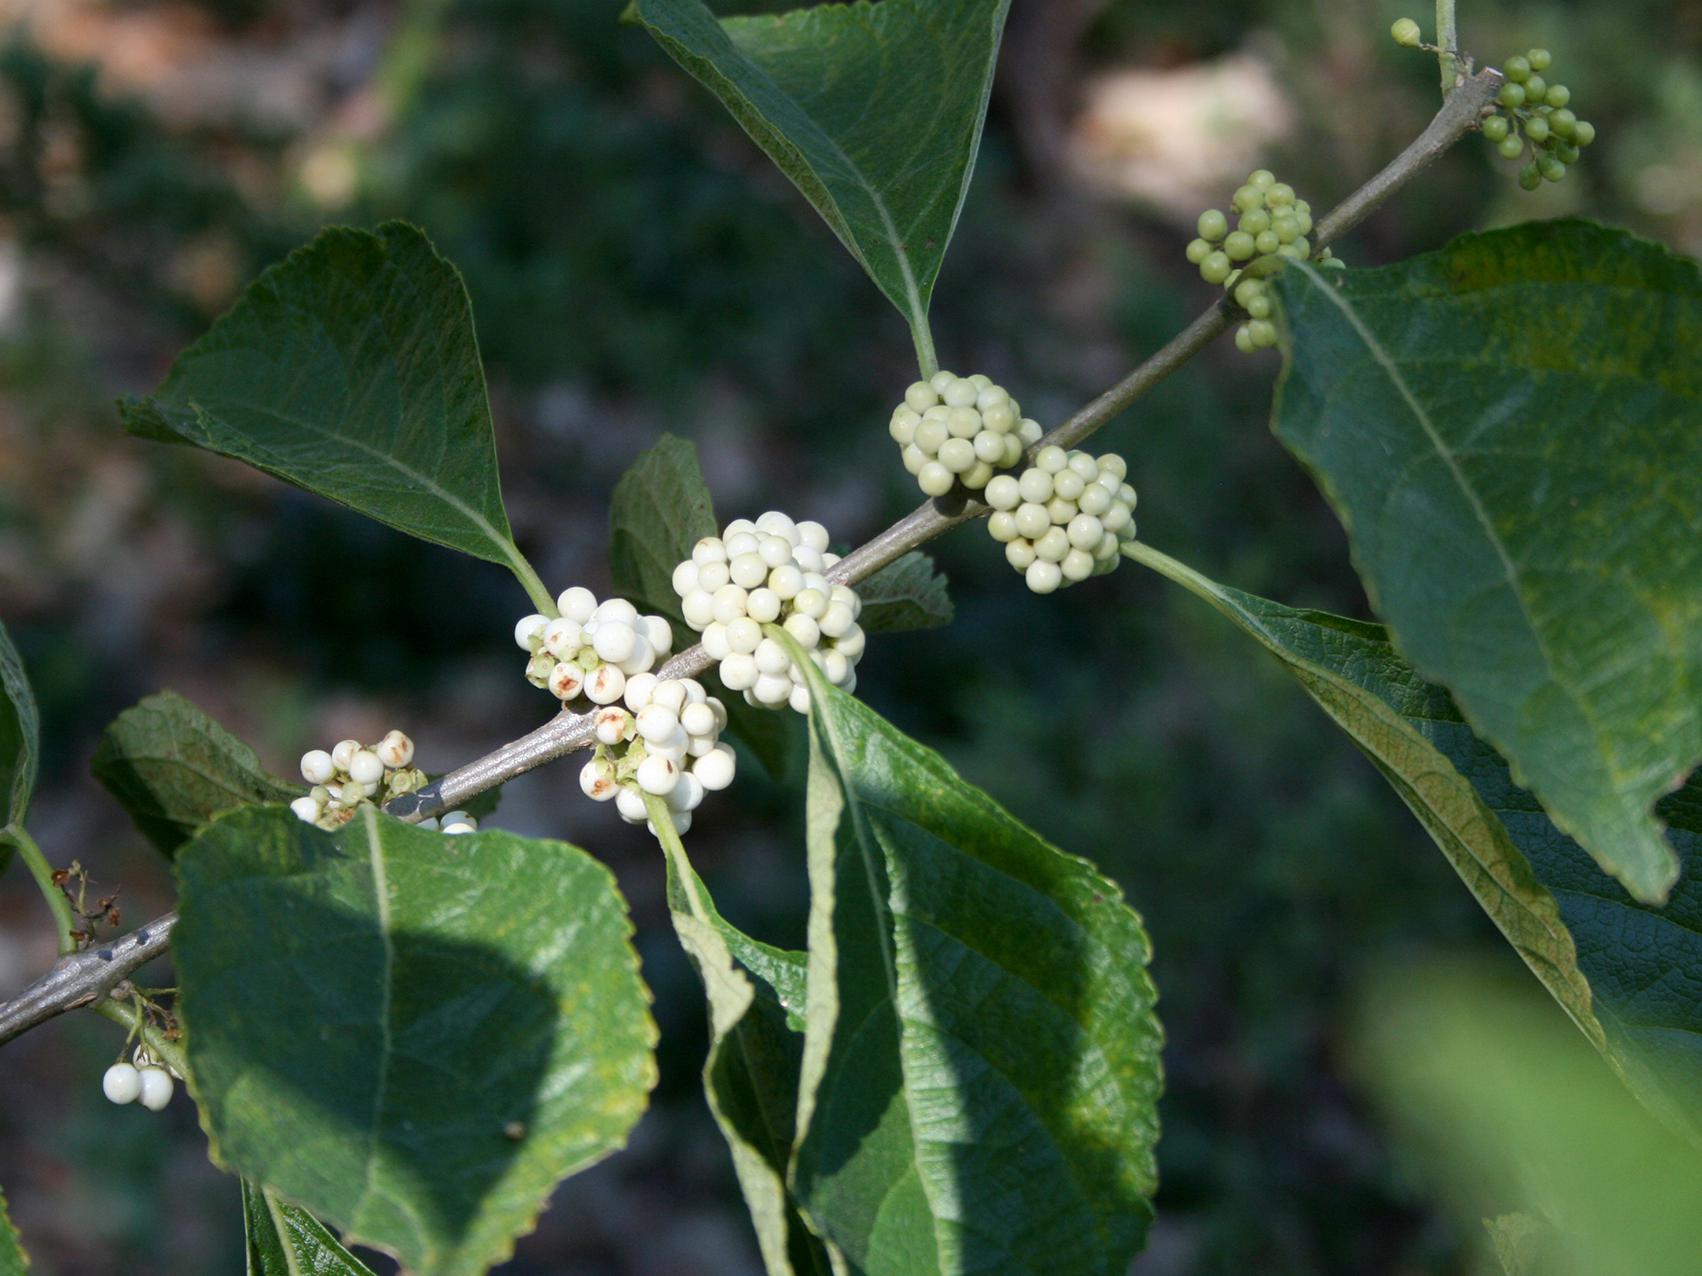 A single branch has bunches of white berries growing at each leaf junction.